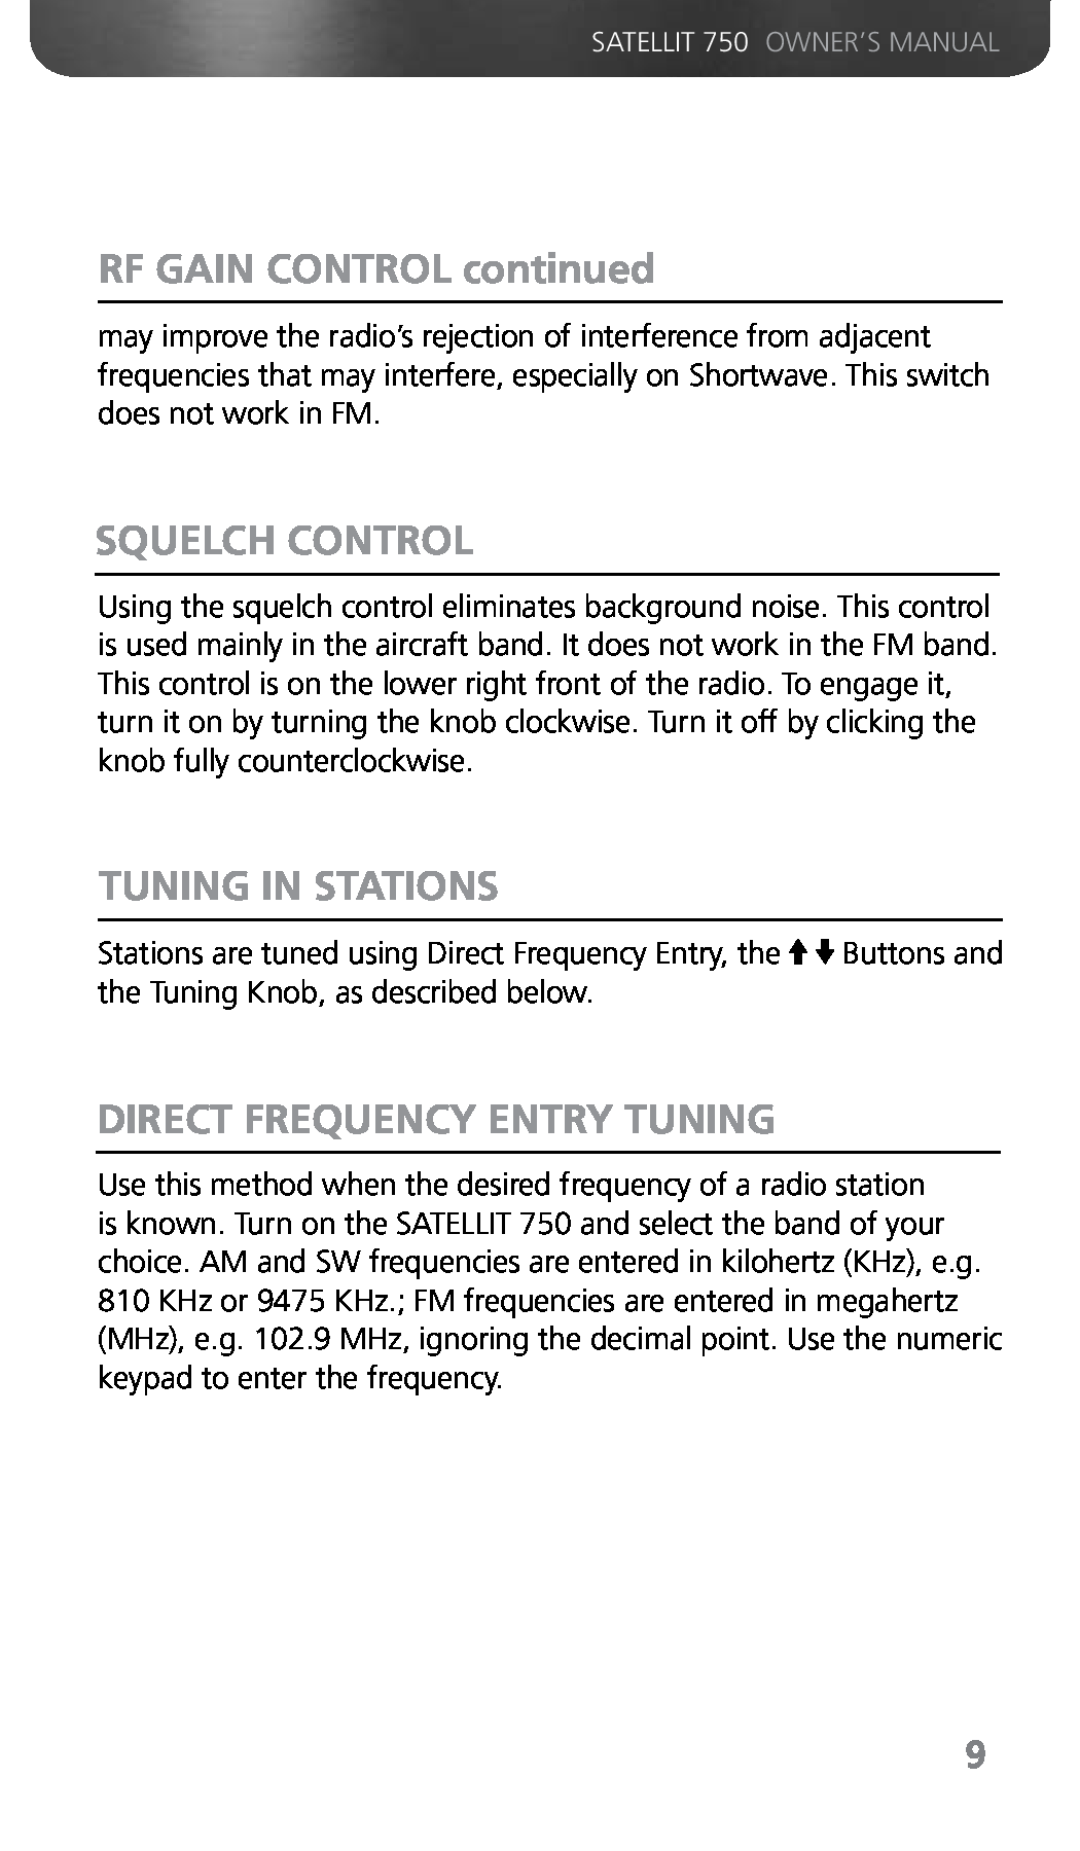 Grundig 750 owner manual RF GAIN CONTROL continued, Squelch Control, Tuning In Stations, Direct Frequency Entry Tuning 